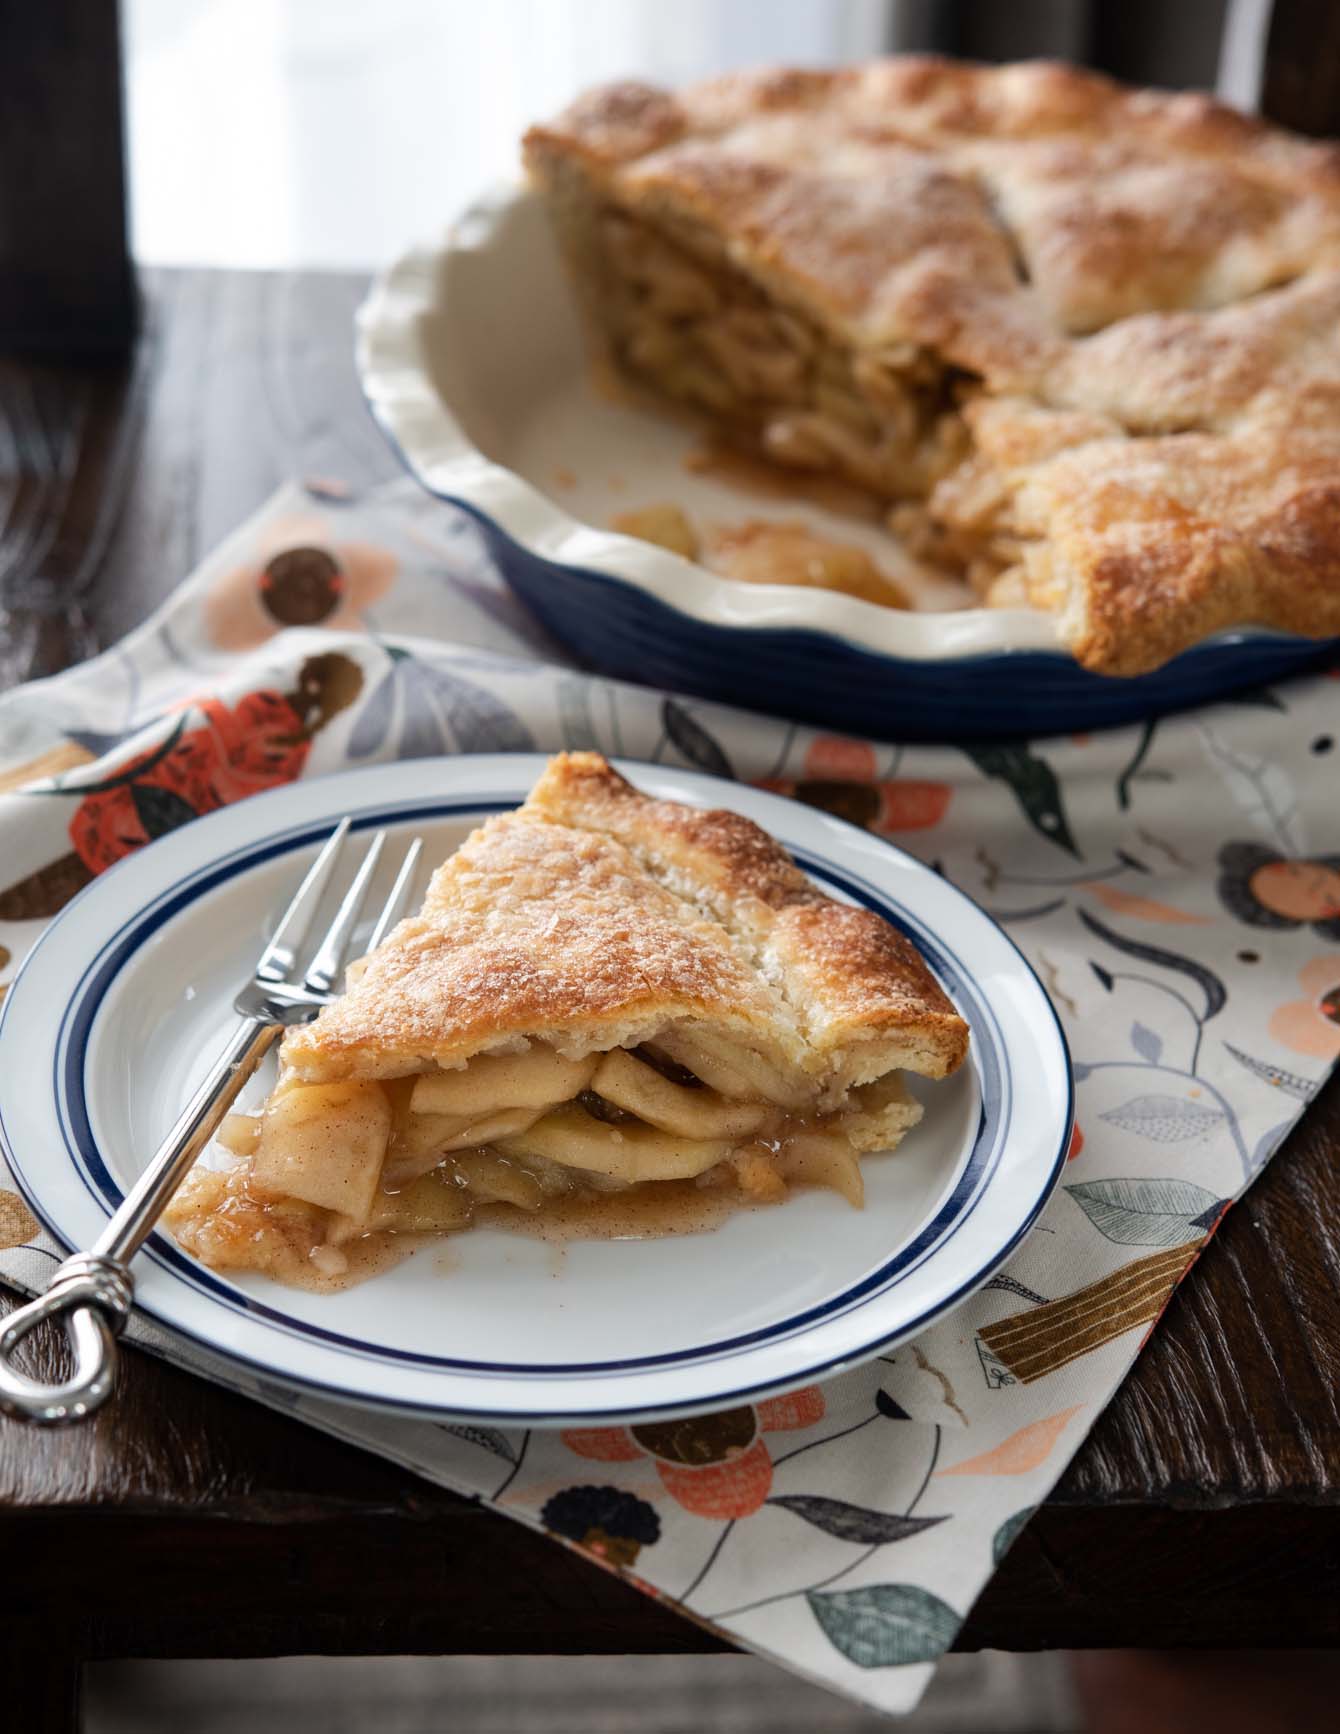 A slice of deep dish apple pie on a plate.